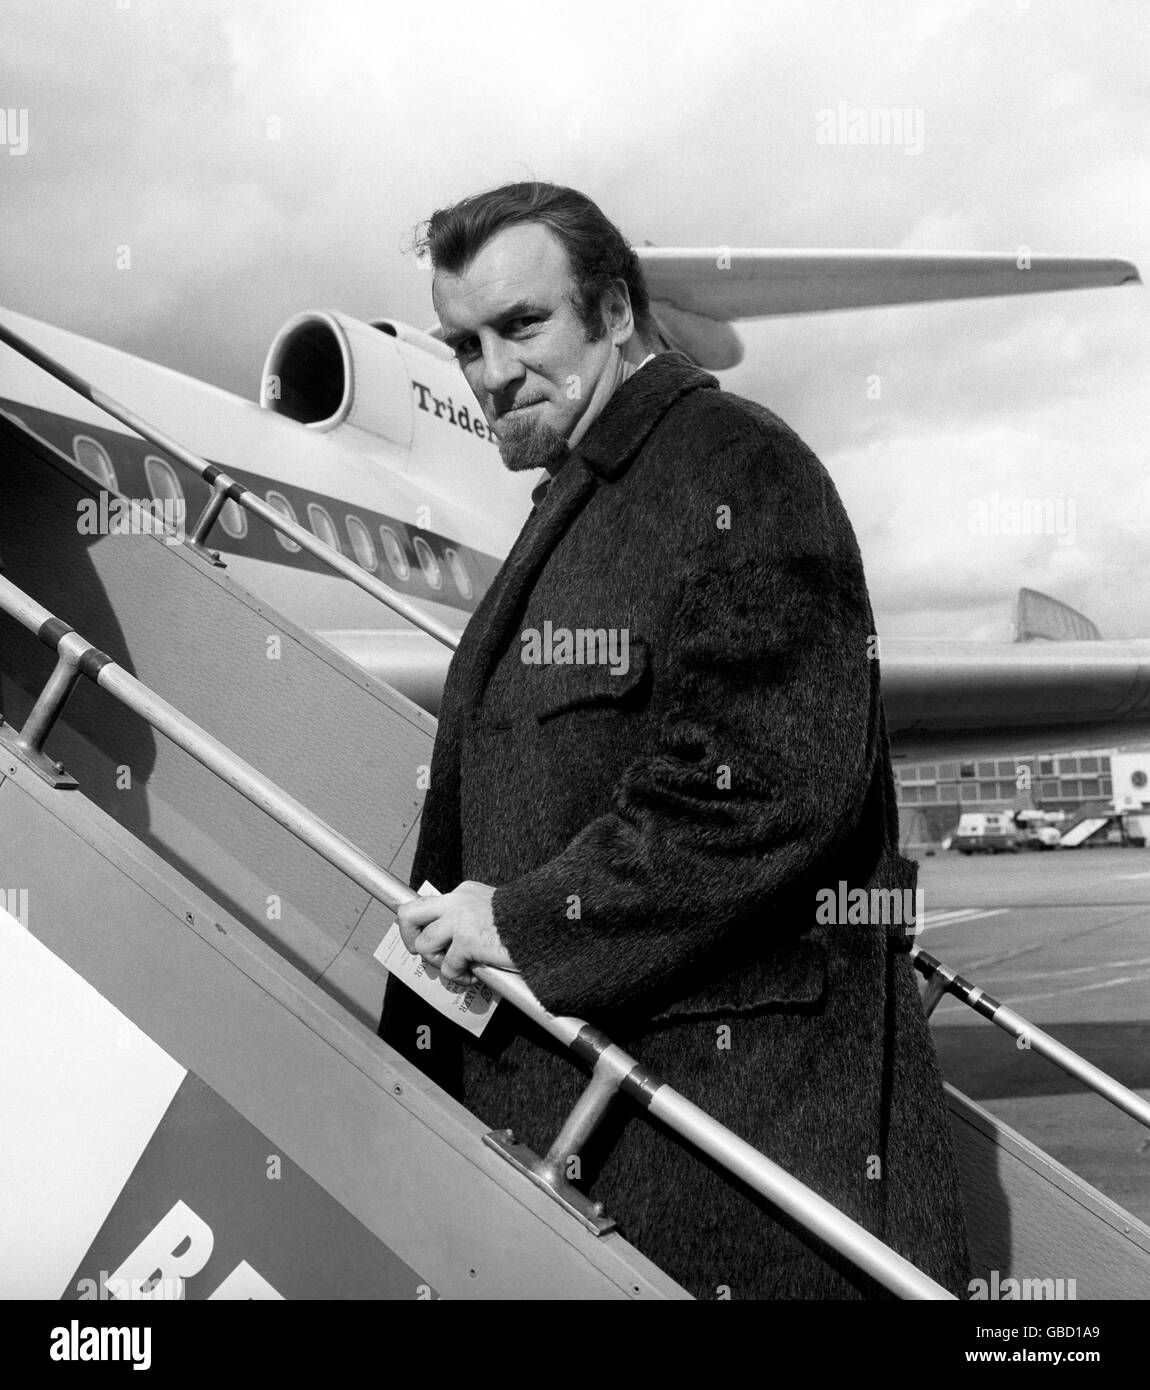 Music - Acker Bilk - Heathrow Airport - London - 1967. Bearded band leader Acker Bilk leaves Heathrow Airport for a concert tour in Germany. Stock Photo